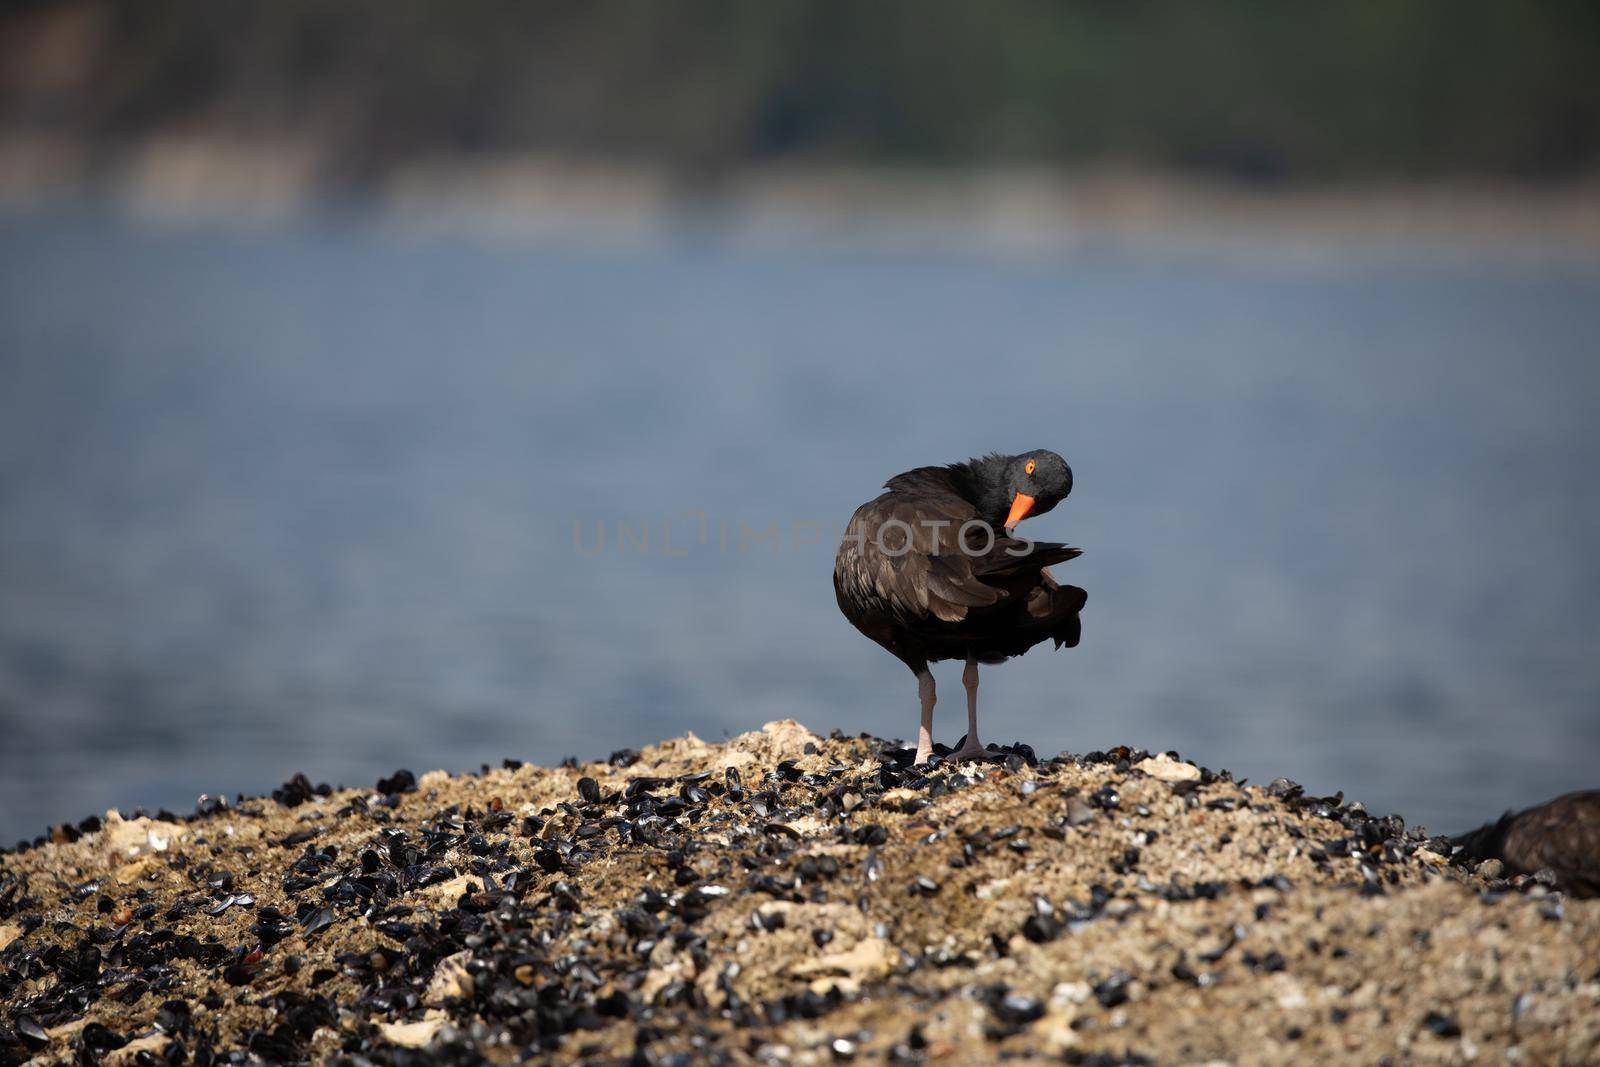 Black Oystercatcher ruffling and preening its feathers while standing on a shell covered rock with water in the background, near Ballet Bay, Sunshine Coast, British Columbia